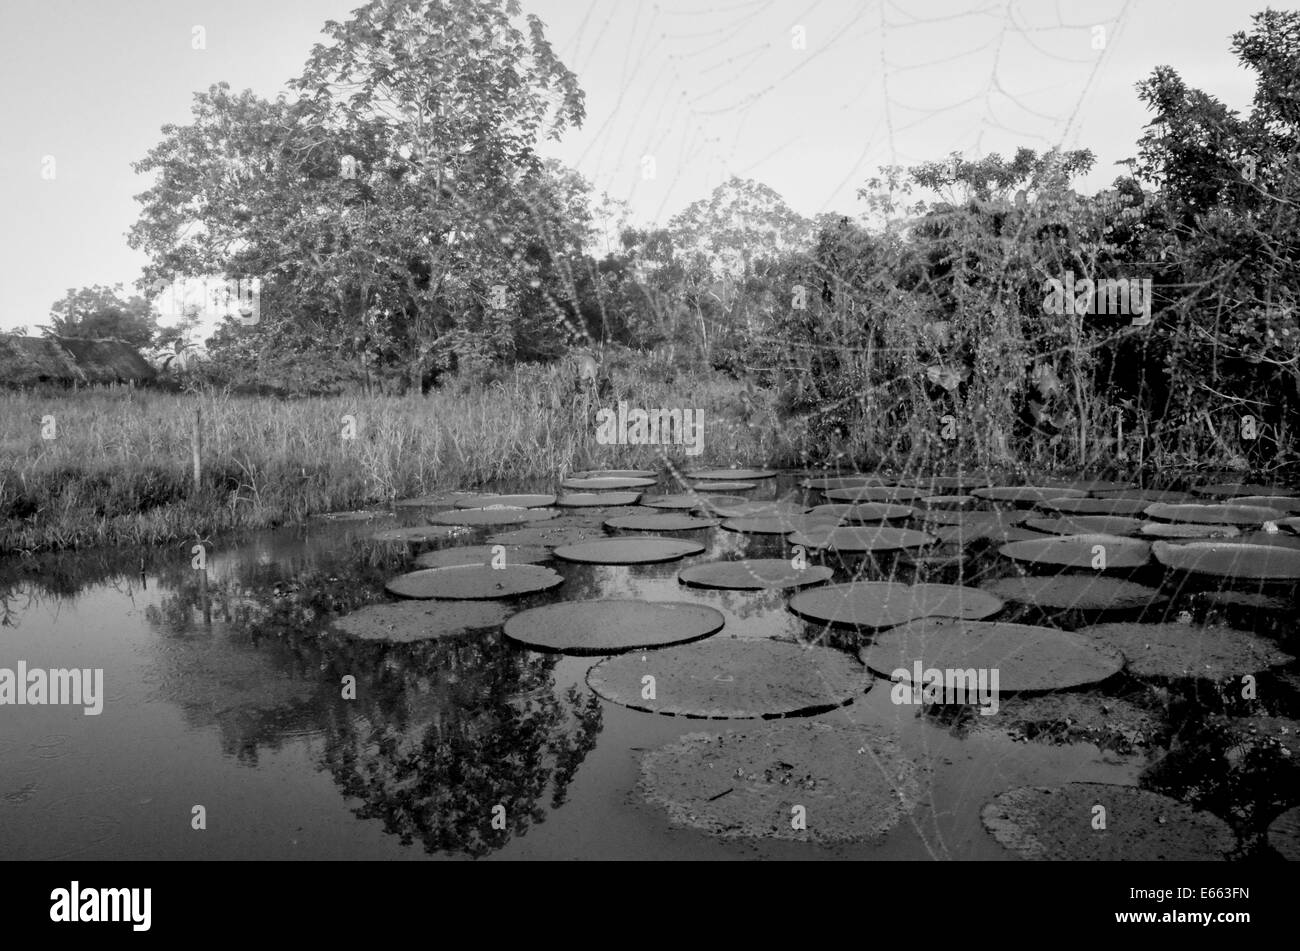 Giant Victoria Amazonica water lily pads in the Amazon region of Loreto, near Iquitos, Peru Stock Photo